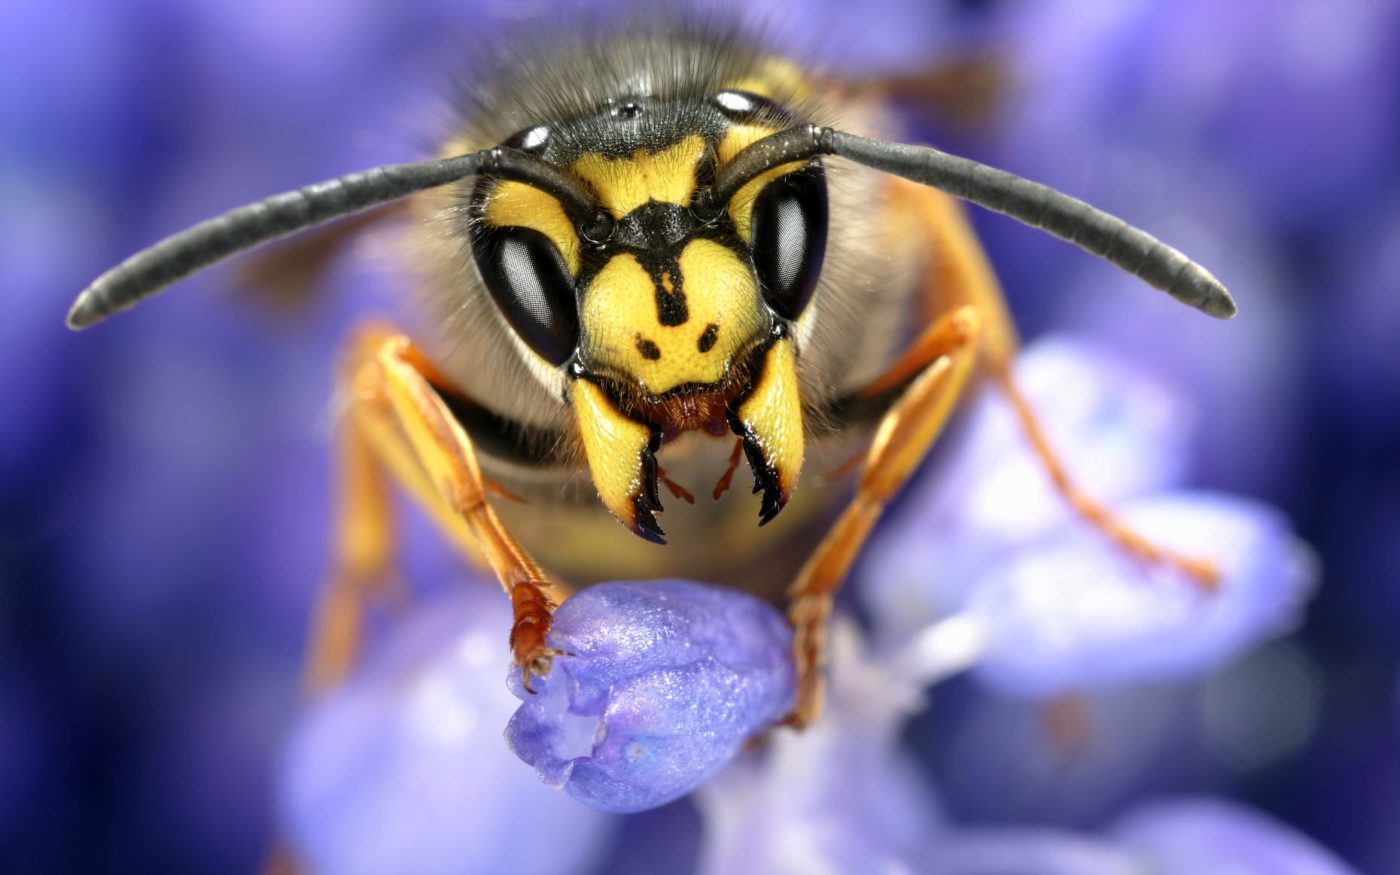 Queen common wasp, Vespula germanica, resting on grape hyacinth after waking